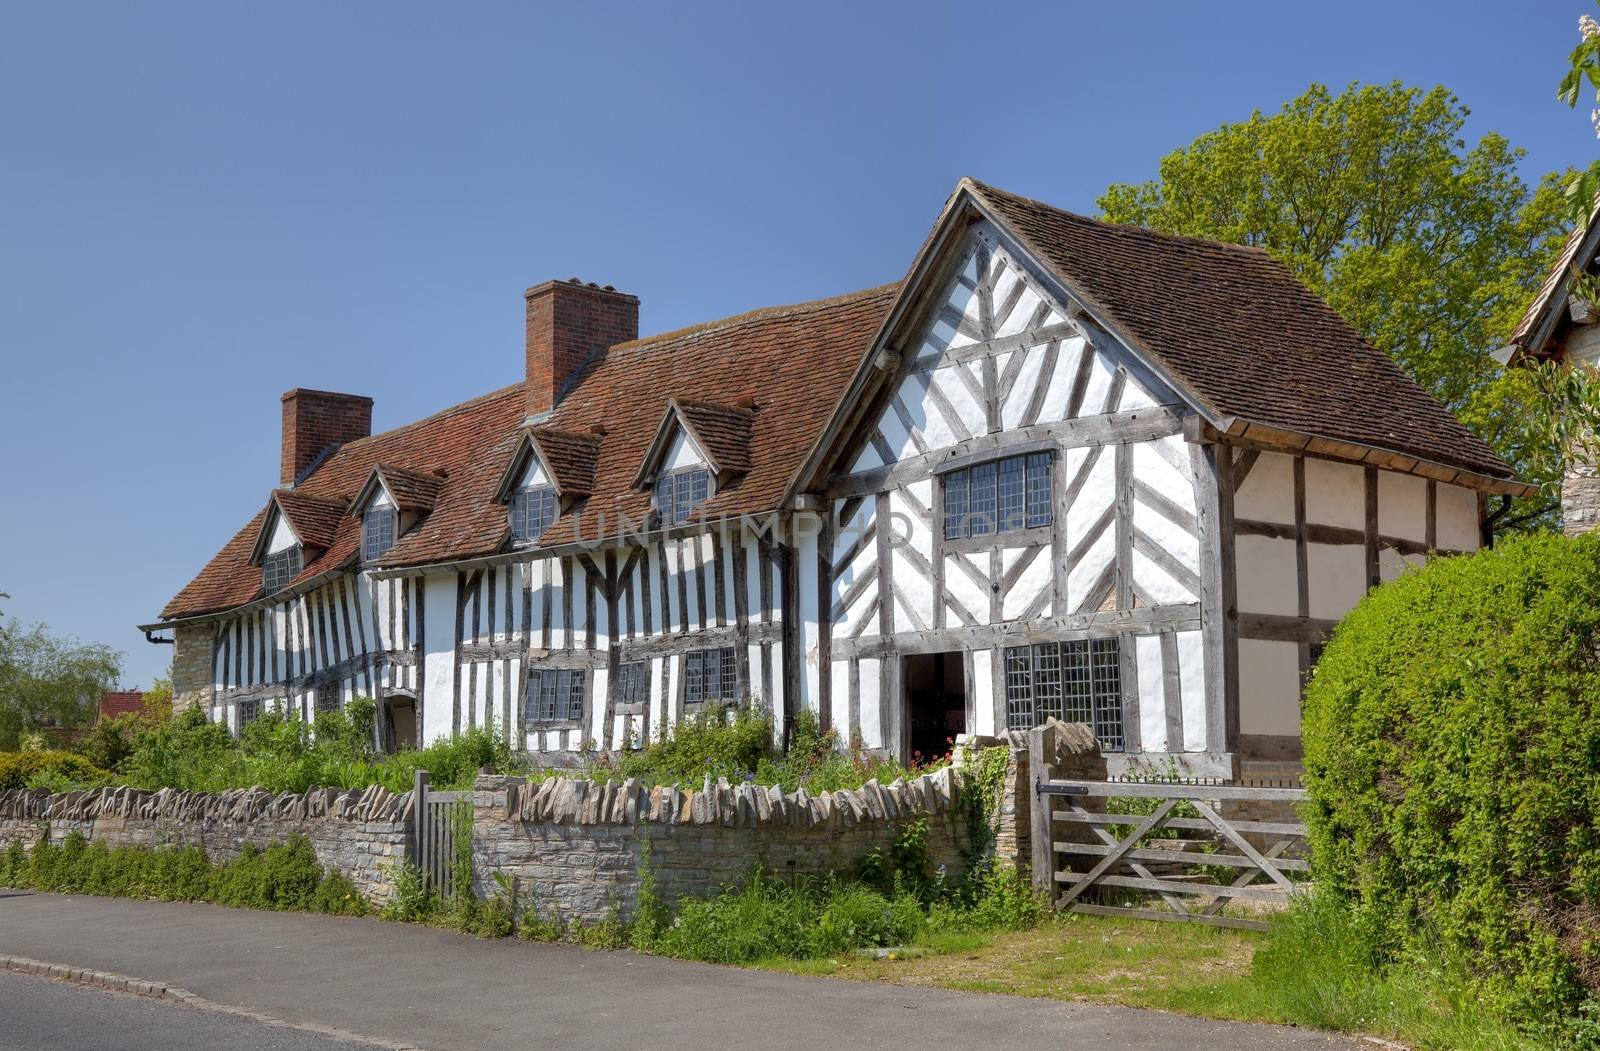 Mary Arden's House (William Shakespeare's Mother), Wilmcote, Warwickshire, England.